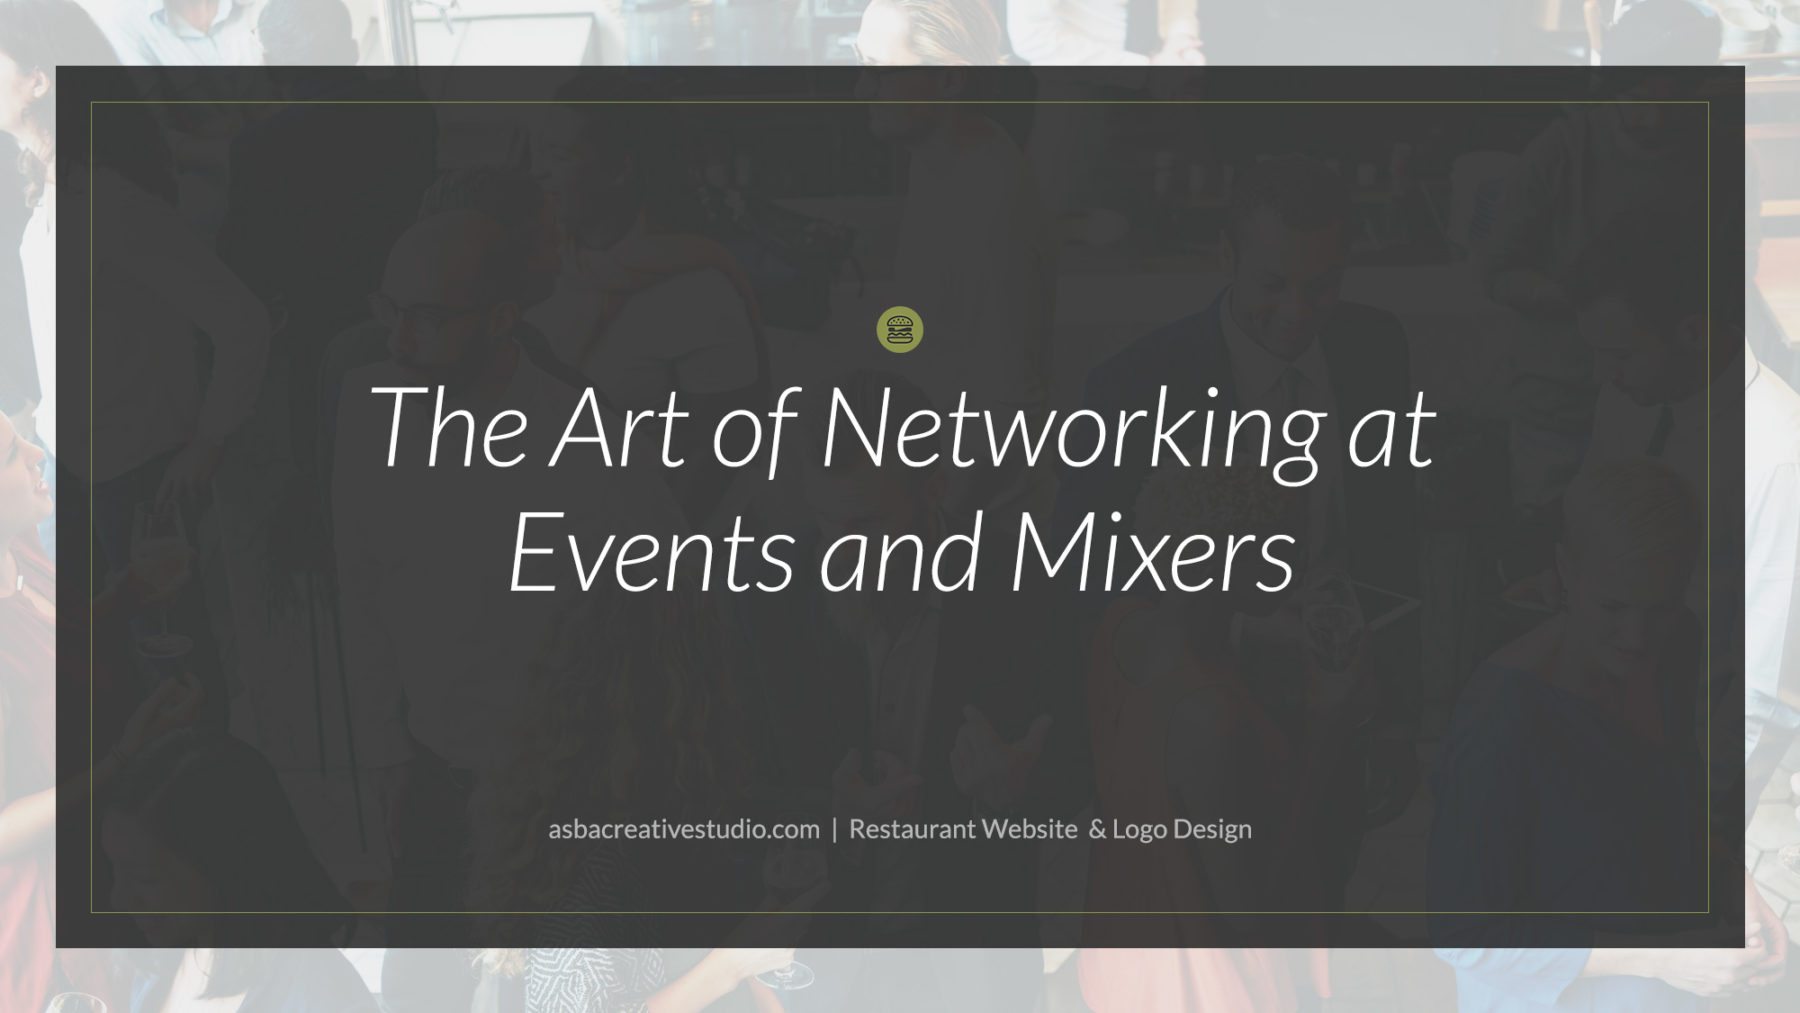 The Art of Networking at Events and Mixers